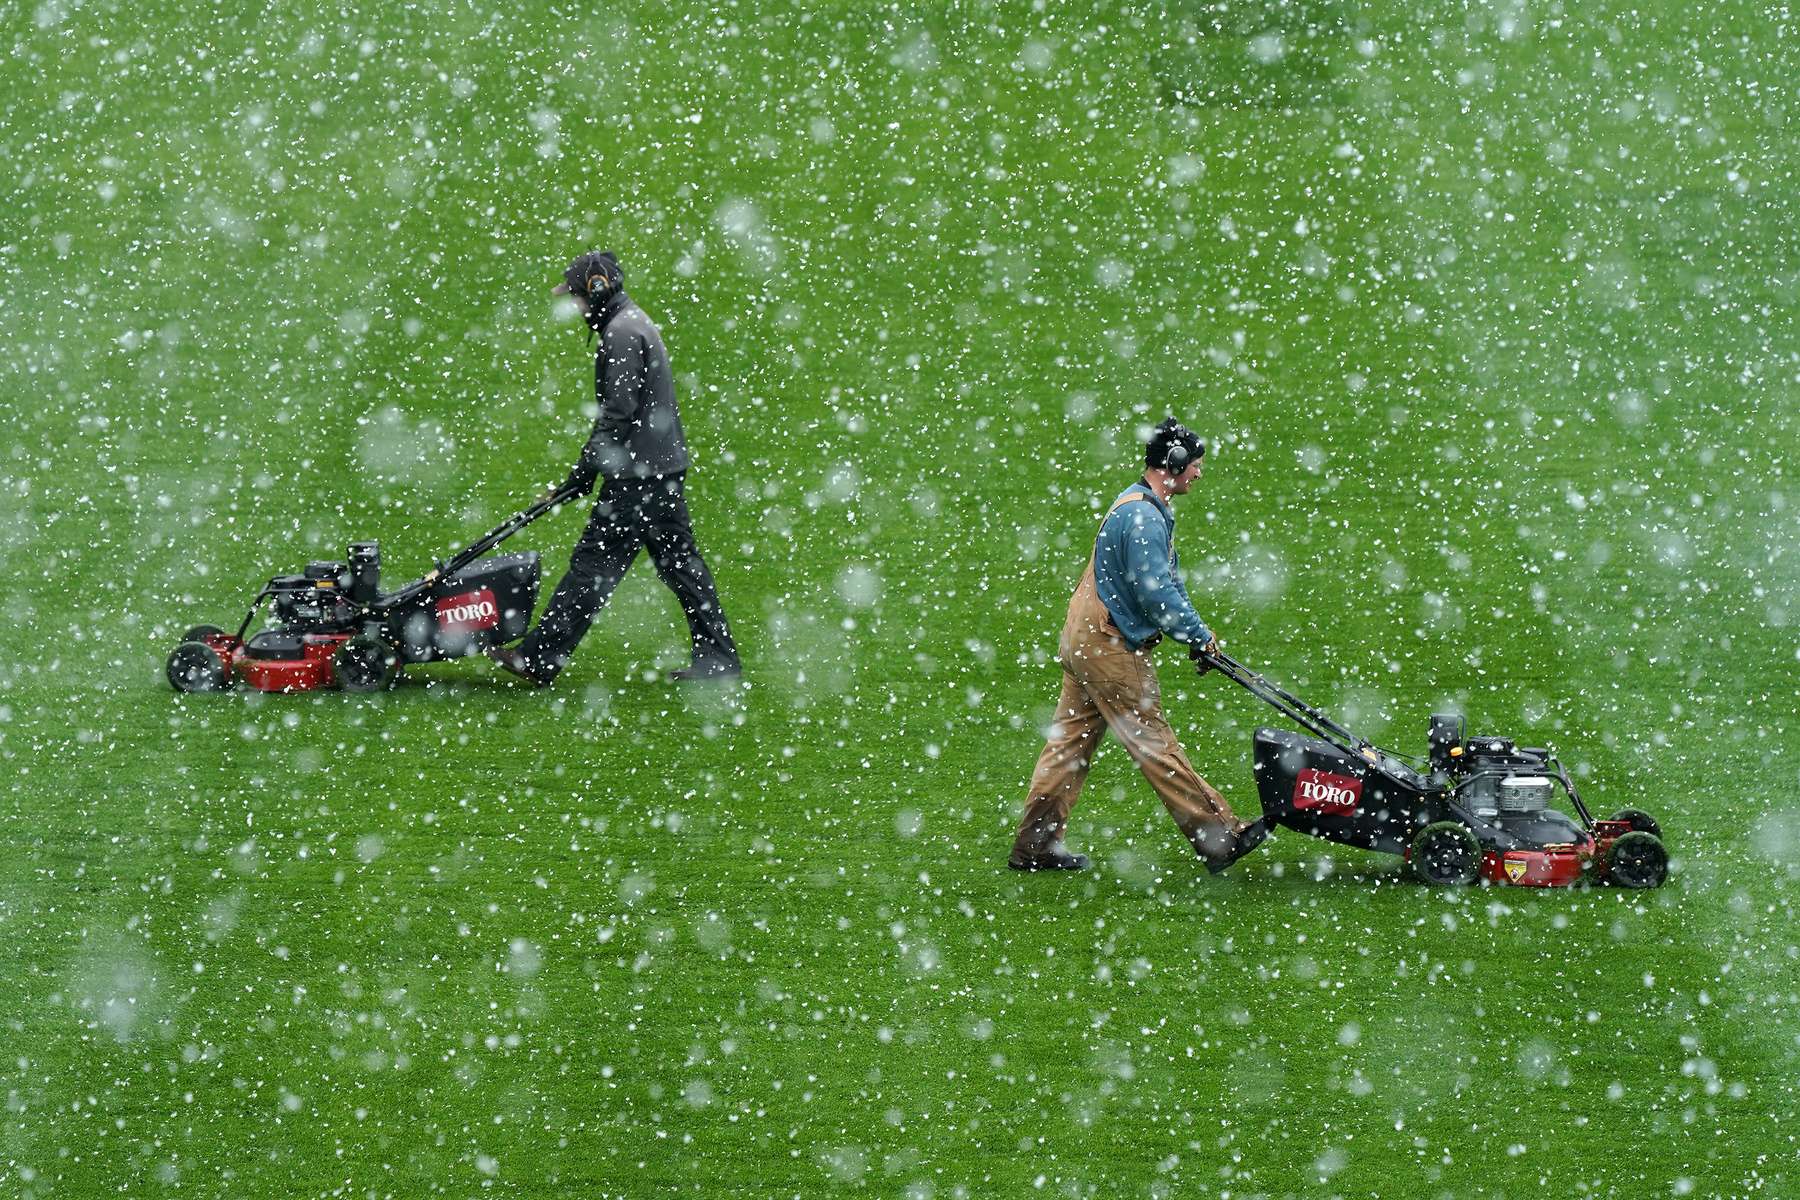 Members of the grounds crew cut the grass at Allianz Field amid heavy snow flurries ahead of their season home opener in St. Paul, Minn.